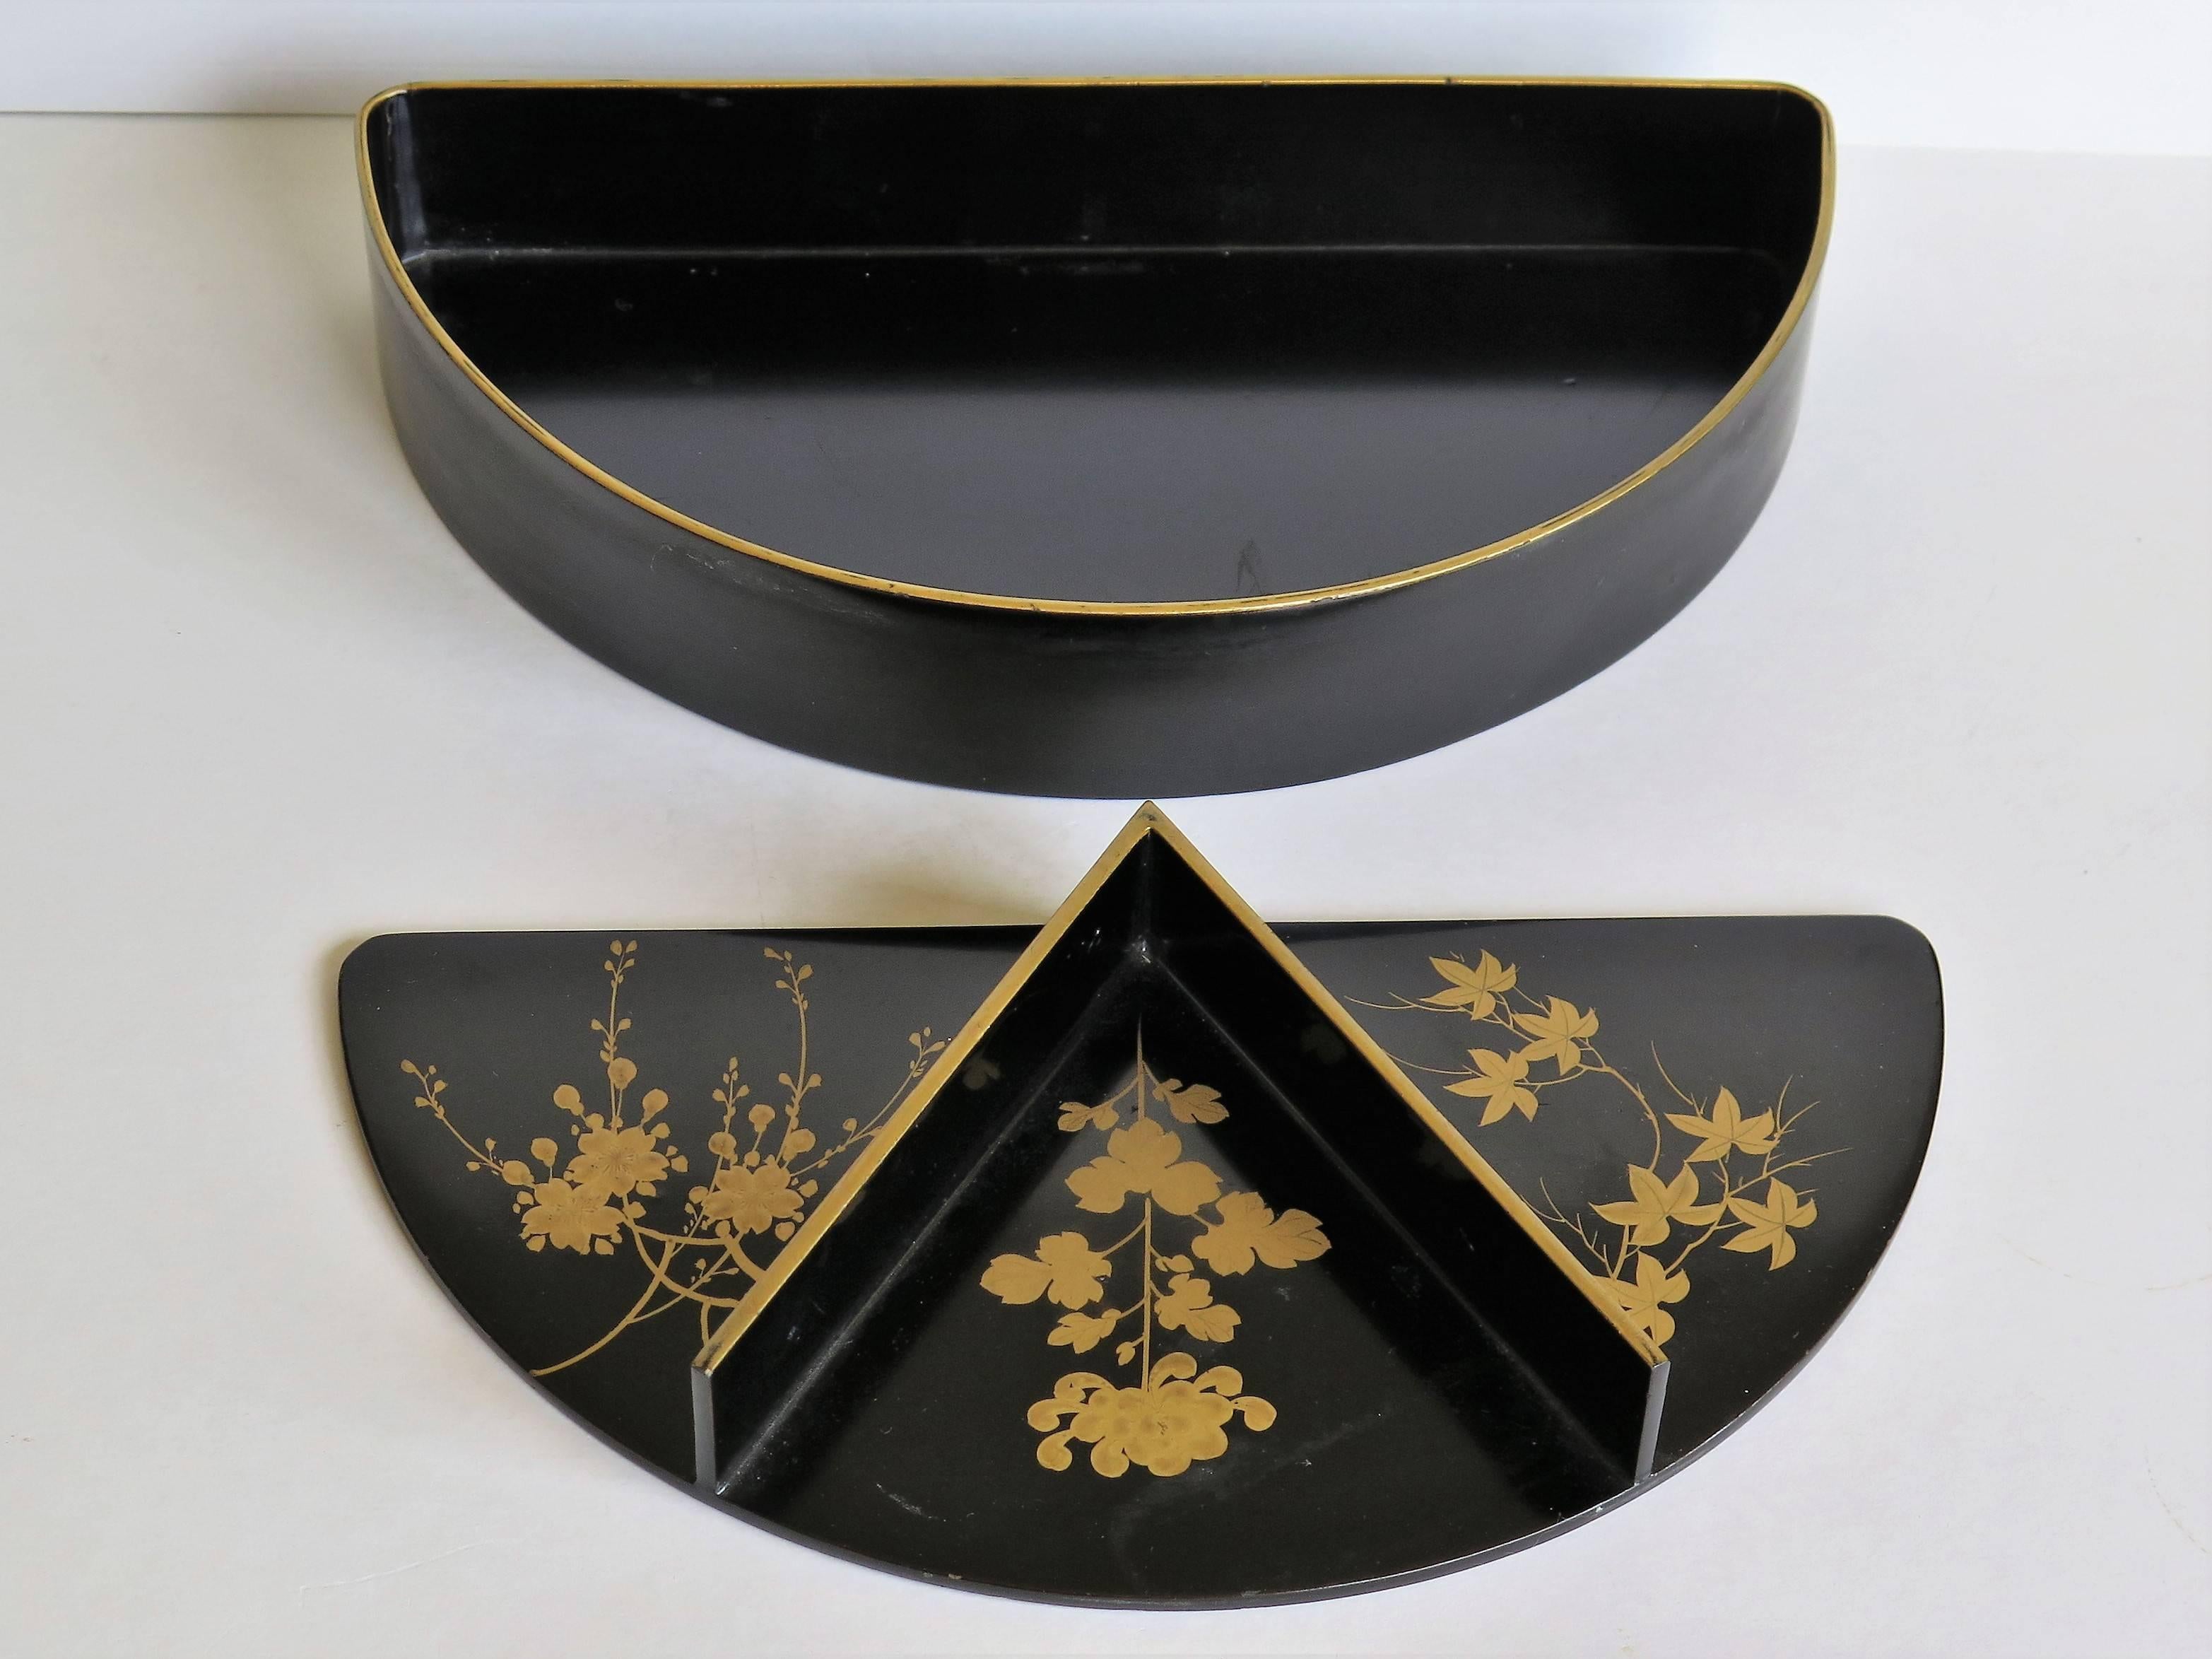 Paper Japanese Papier Mâché Lacquered Box Hand-Painted with 3-Section Tray, circa 1905